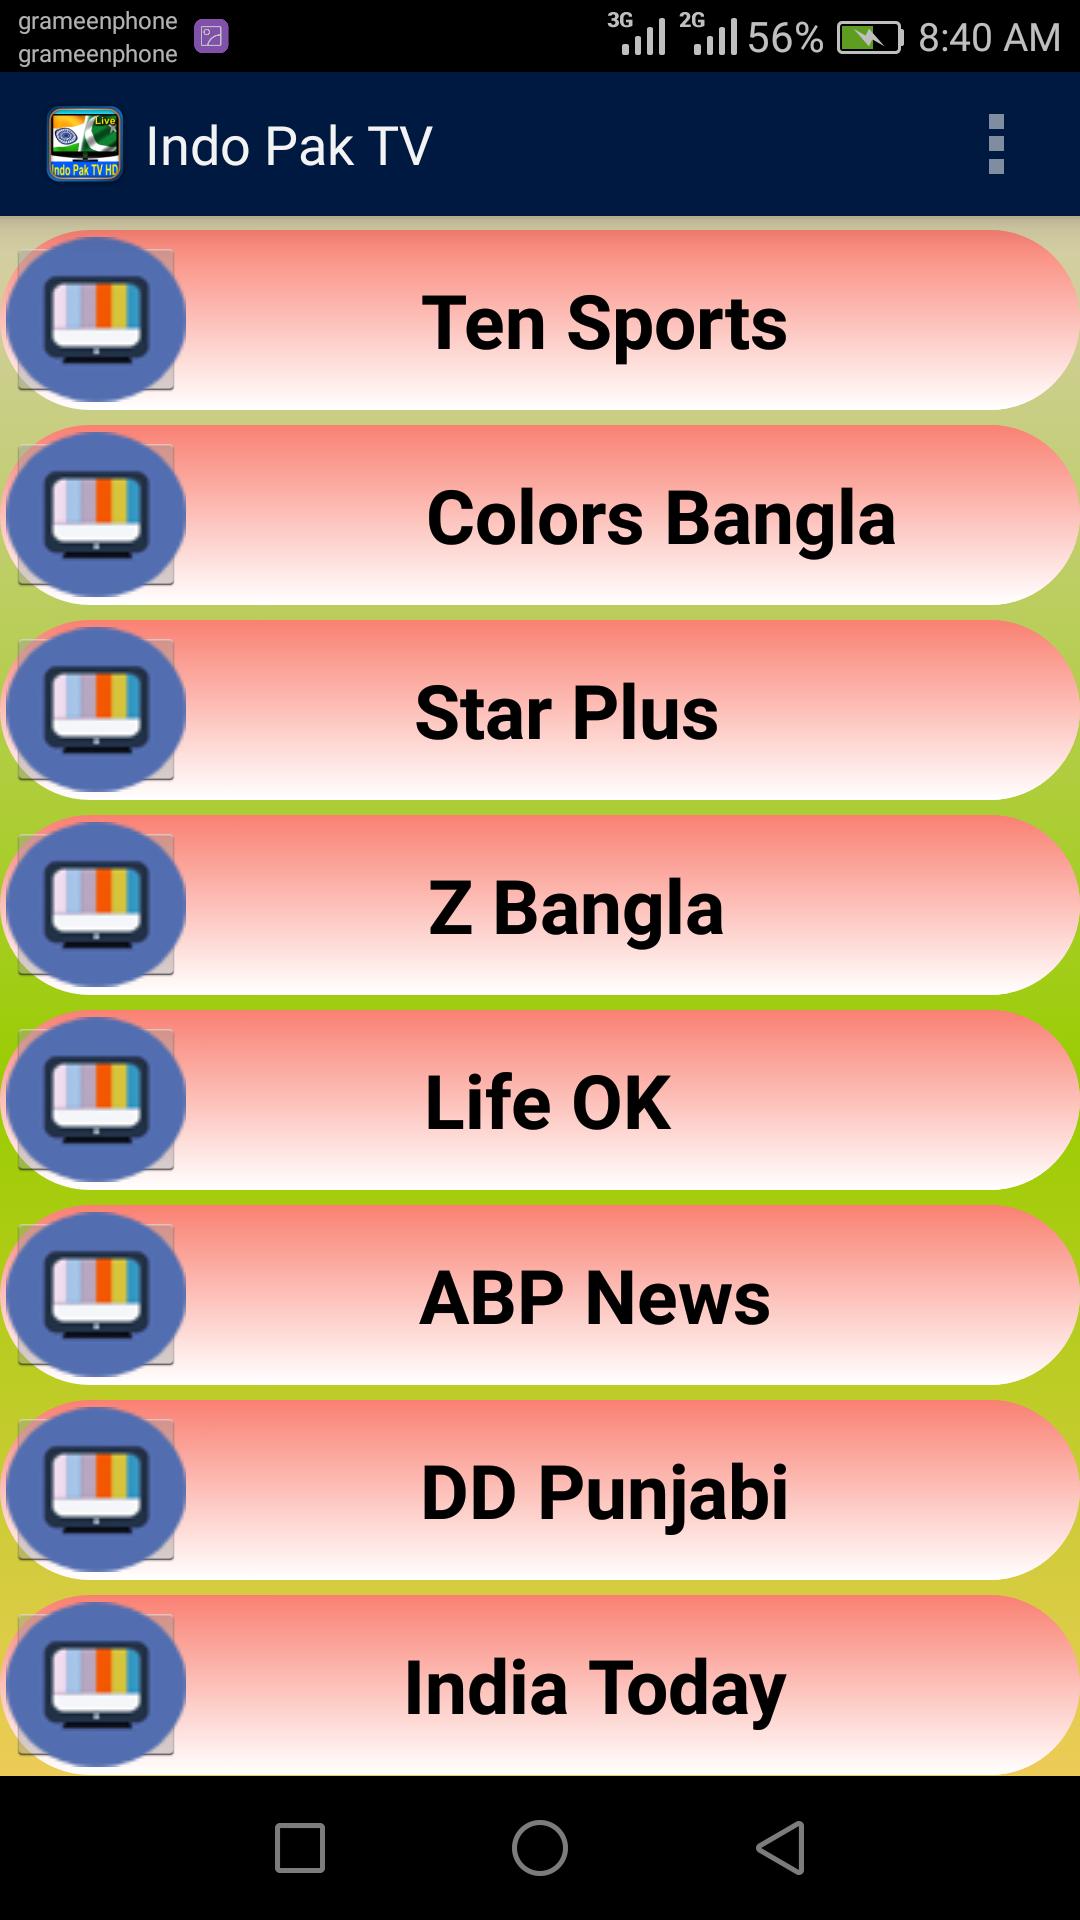 Indo pak tv free download for mobile